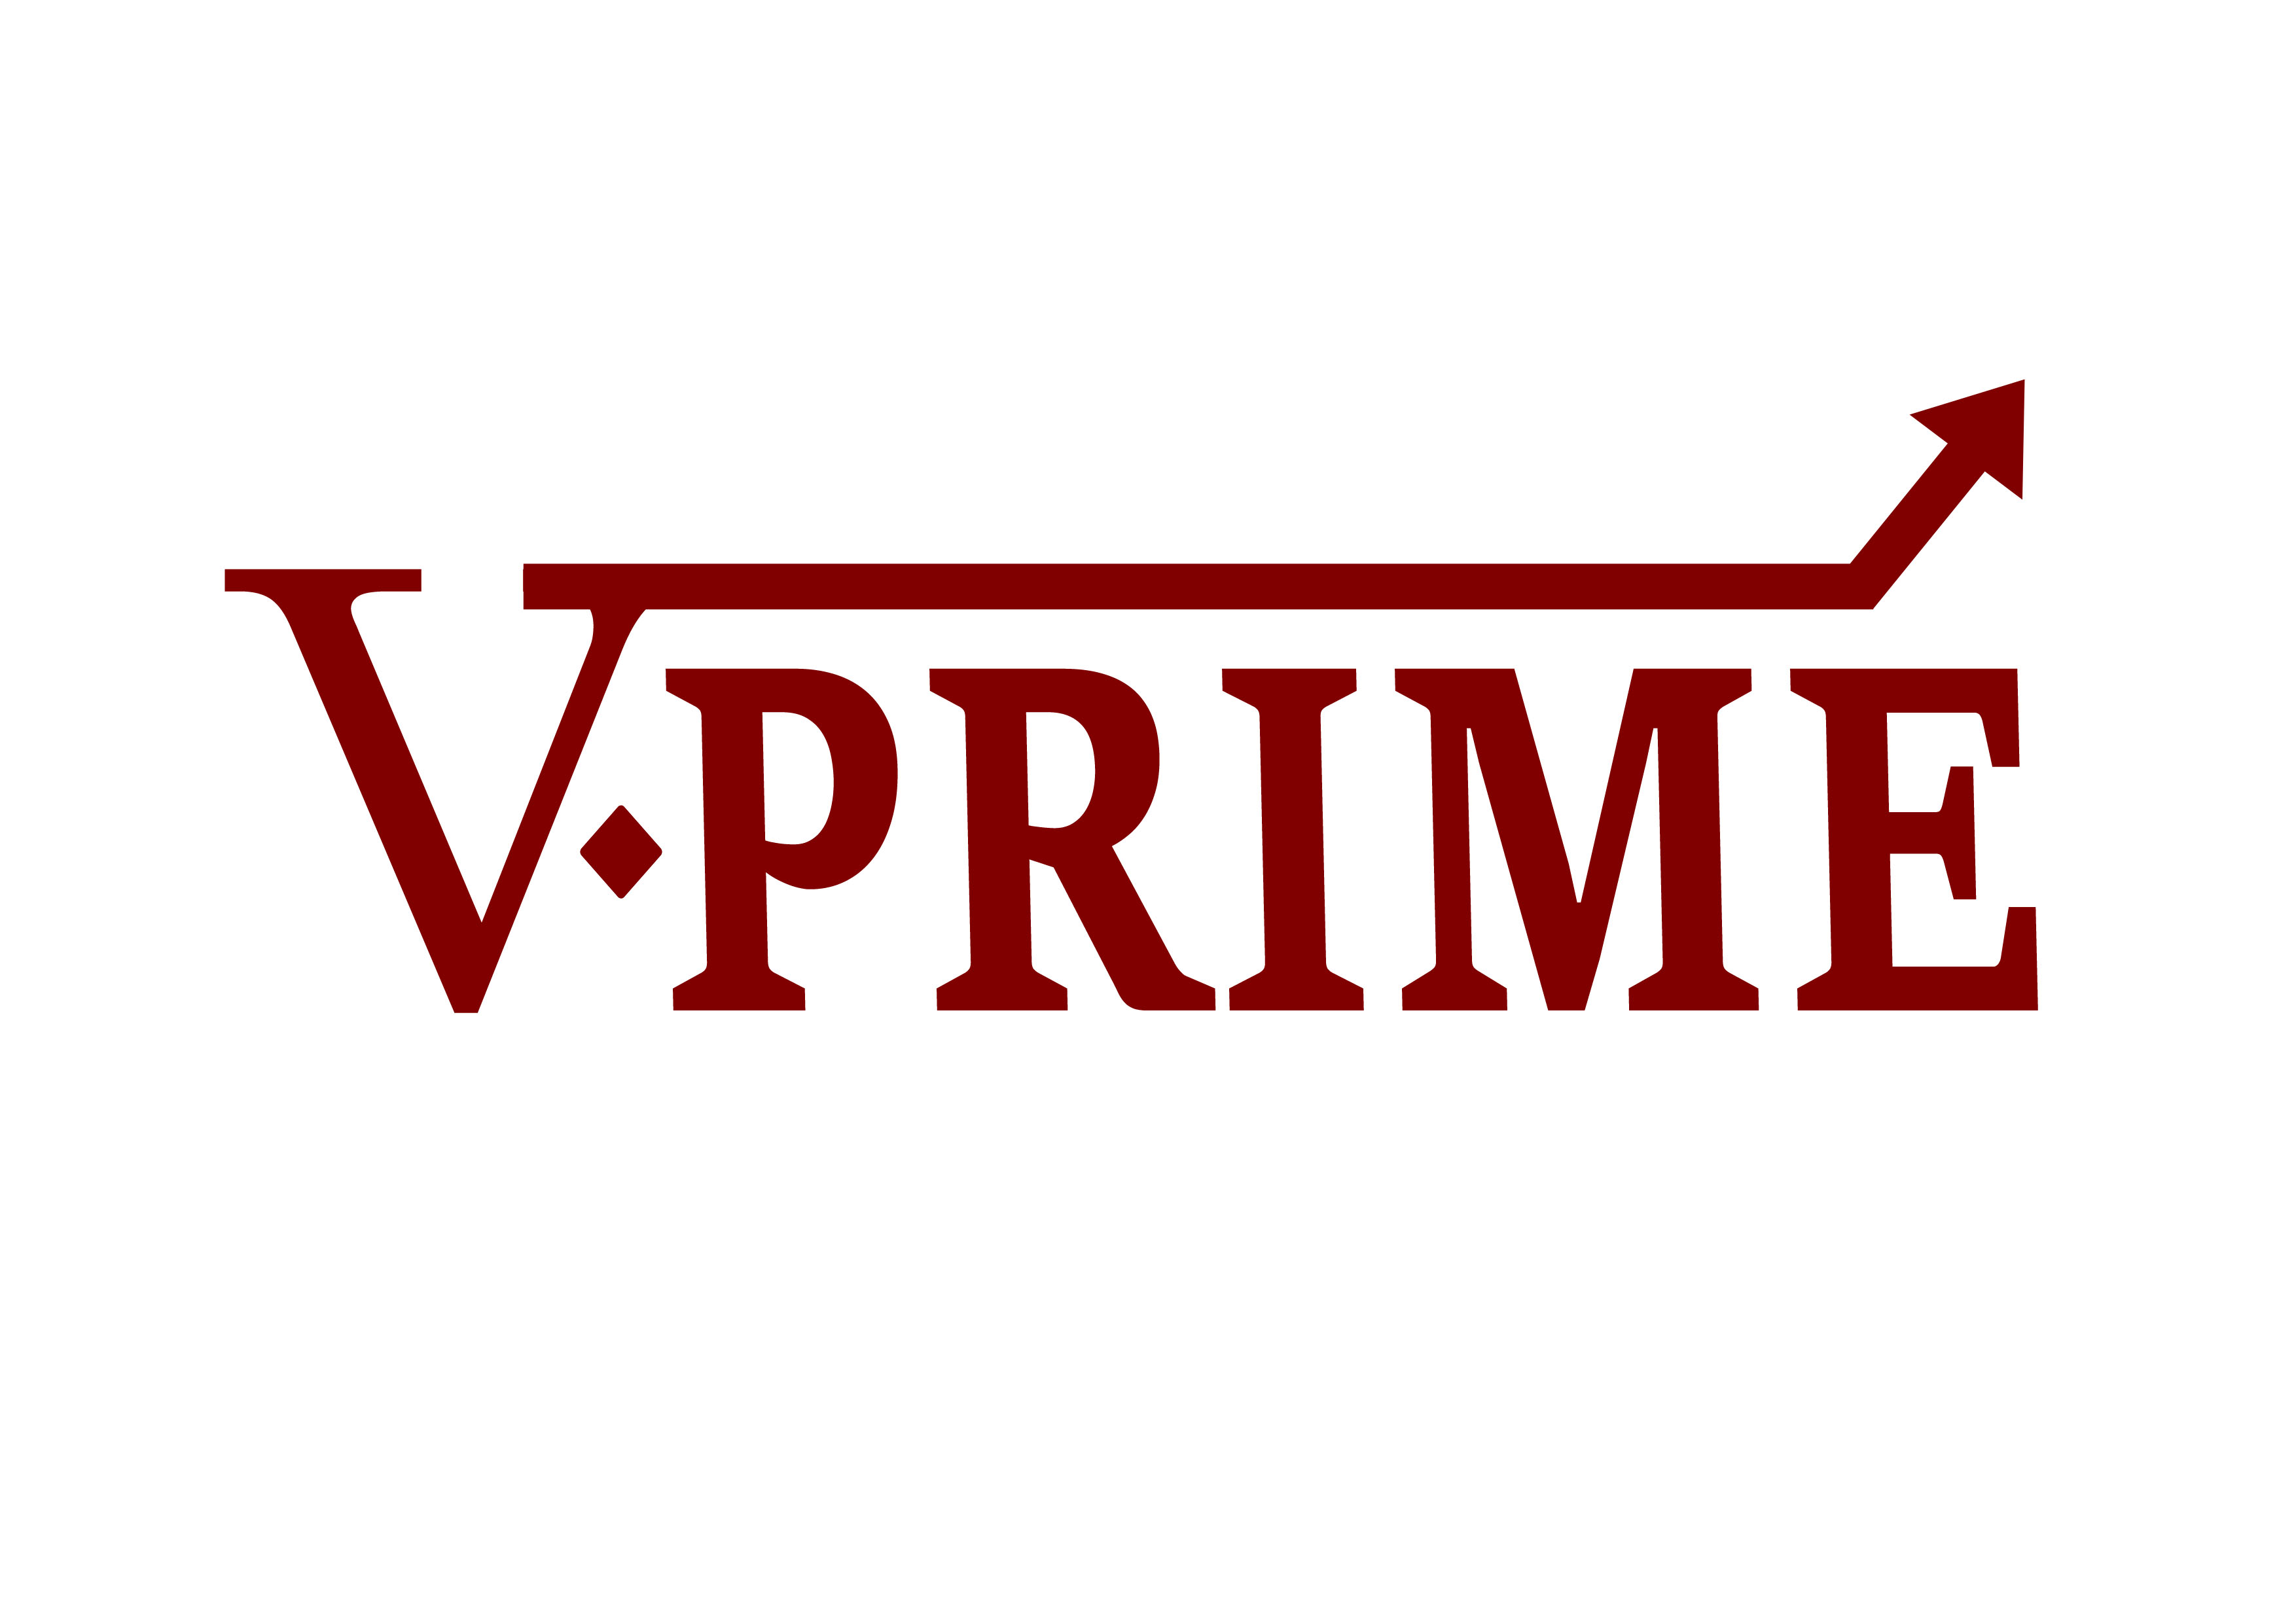 Vikat Prime Energy Solutions Private Limited